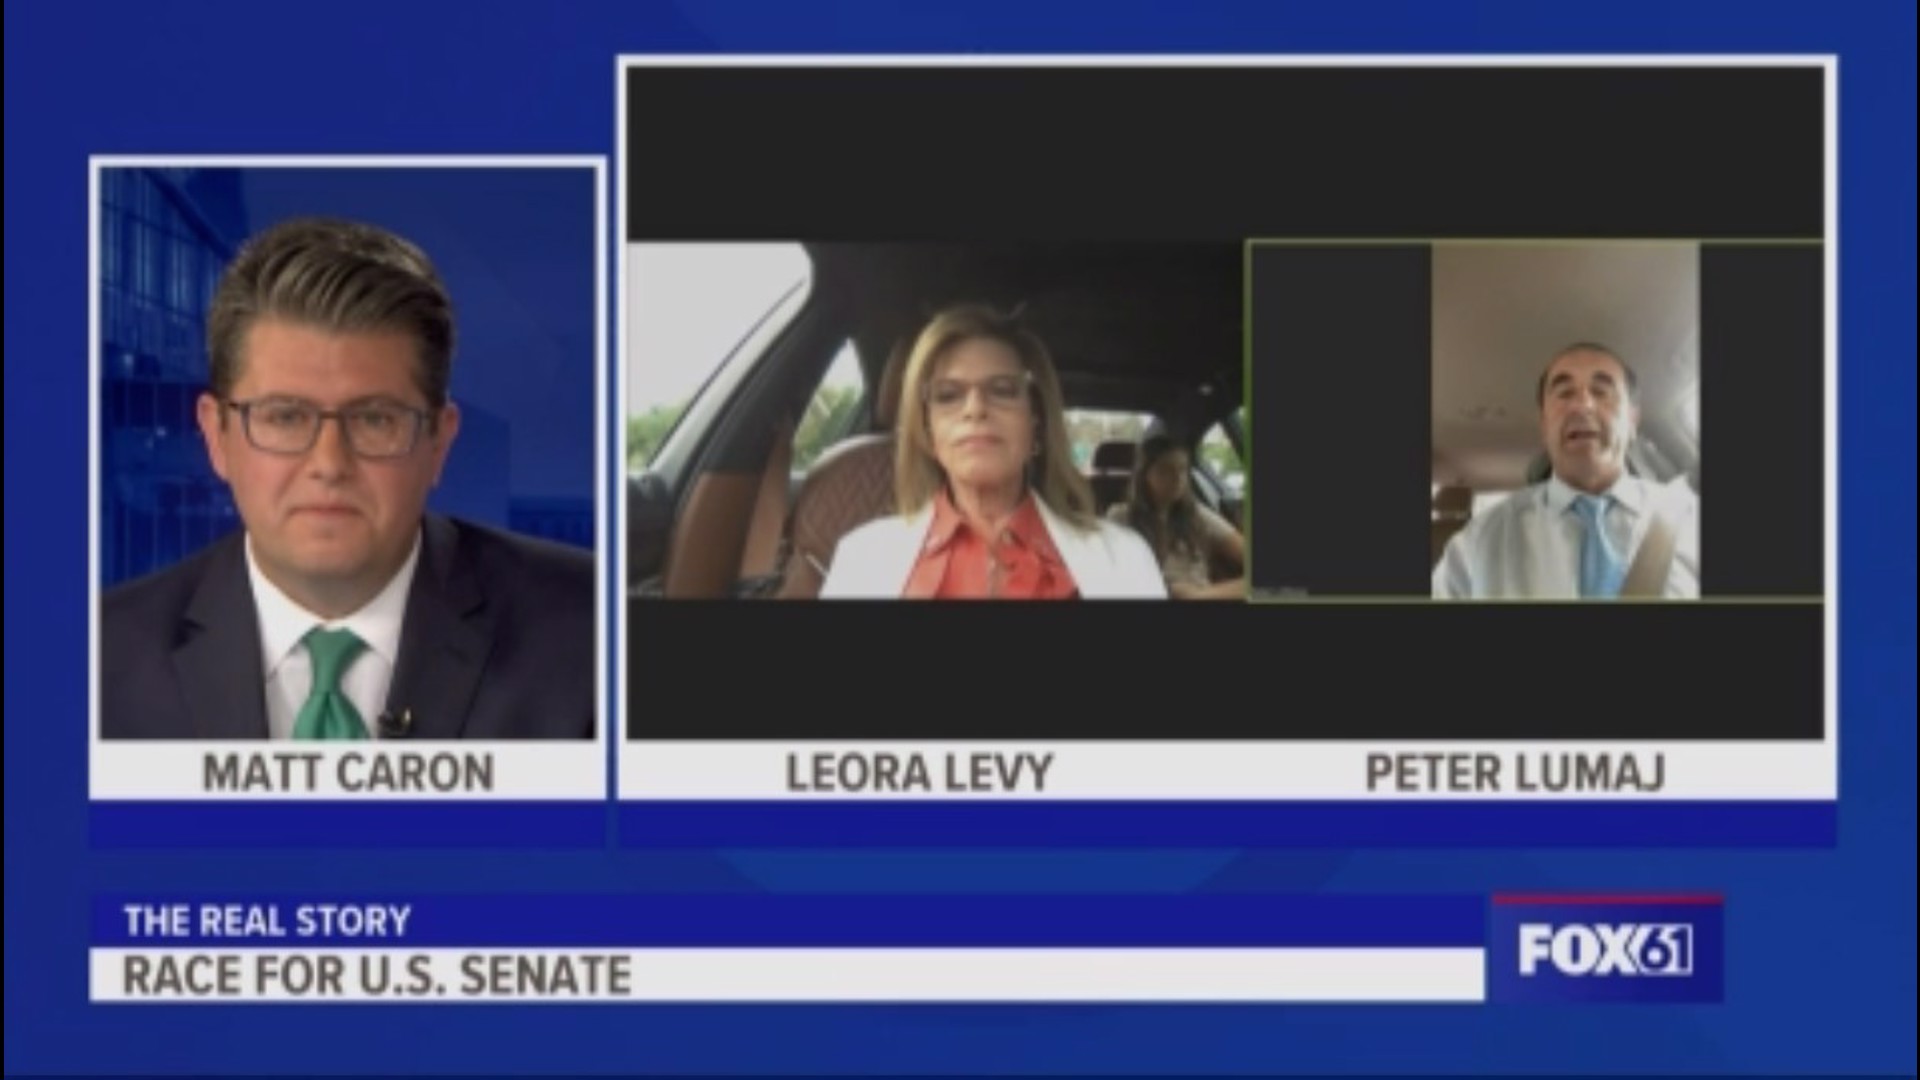 Candidates in the GOP primary Leora Levy and Peter Lumaj outline their positions